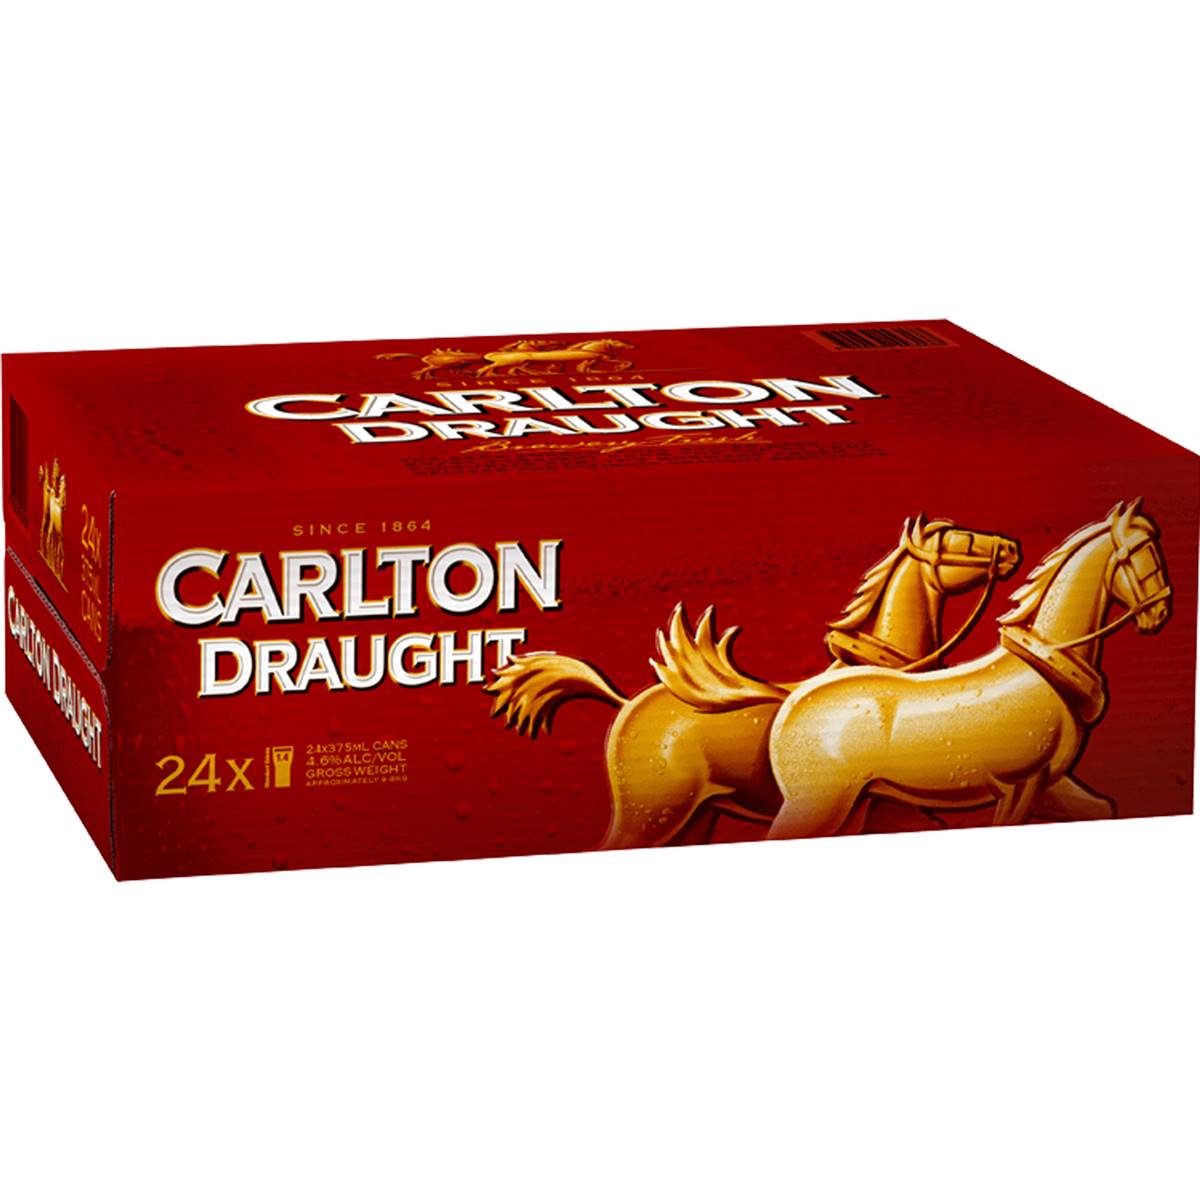 Calories in Carlton Draught Lager Cans